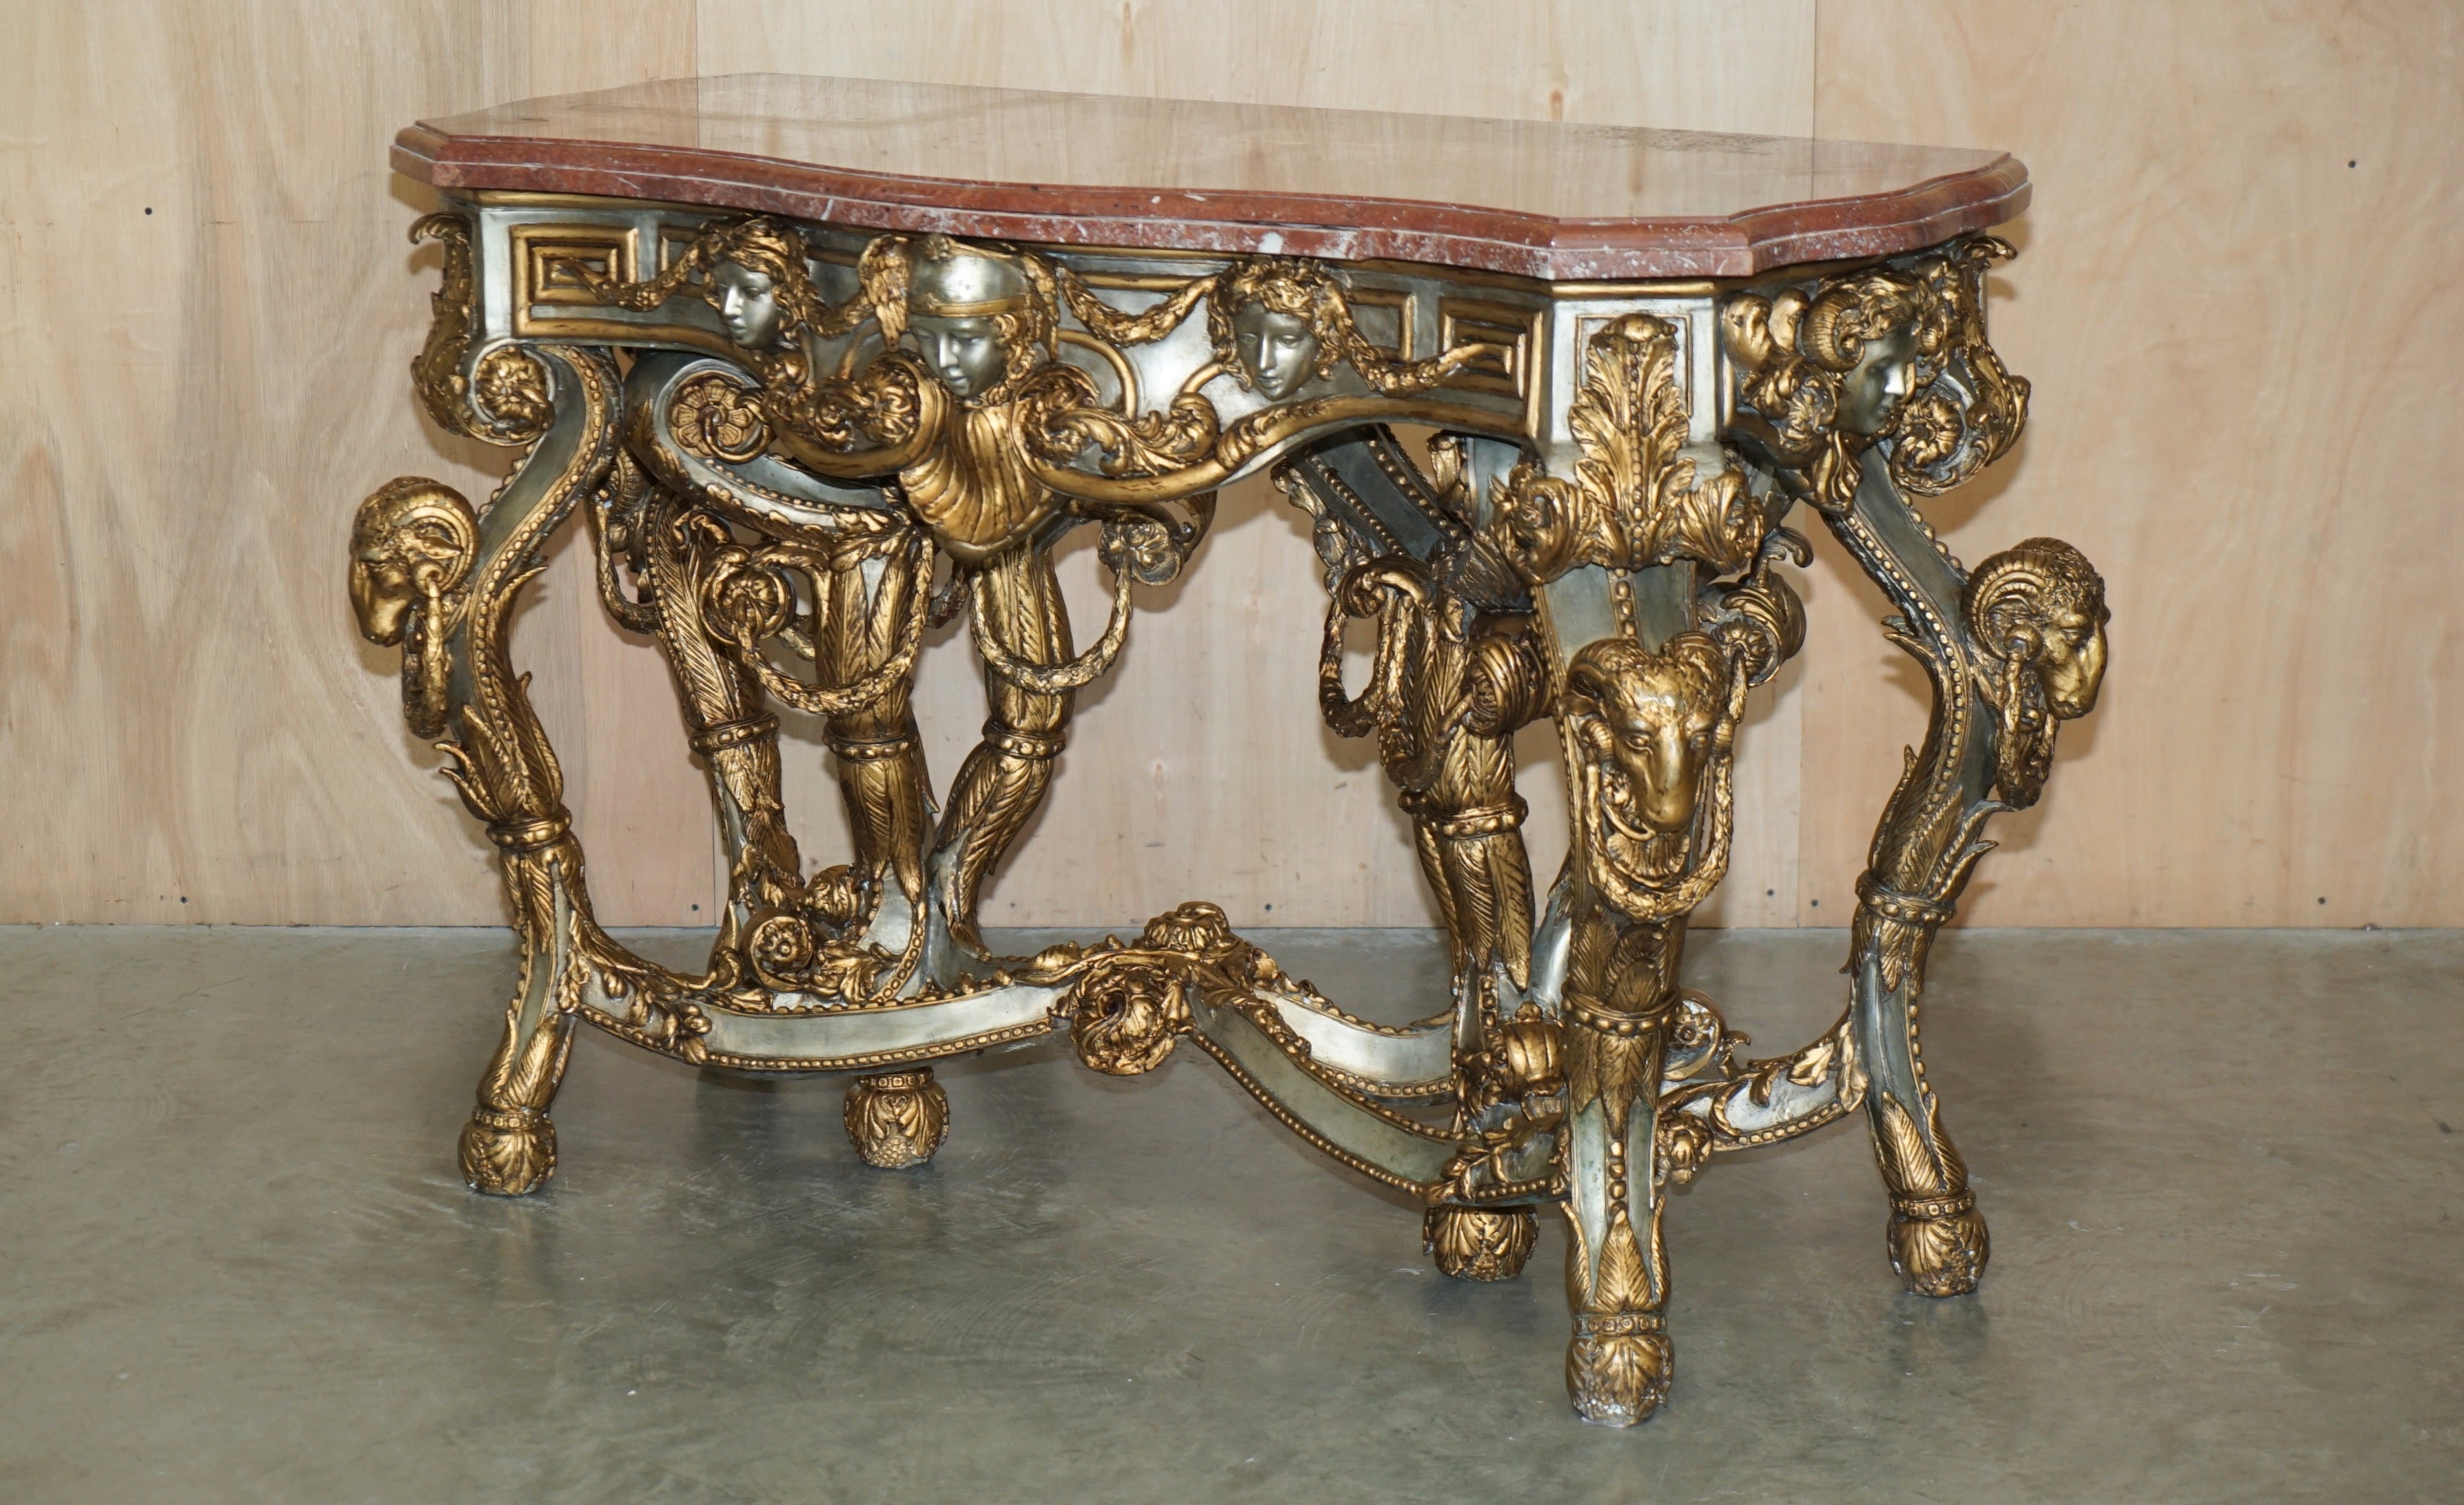 Royal House Antiques

Royal House Antiques is delighted to offer for sale this exceptionally rare, antique metal framed Baroque / Rococo French console table with the original distressed marble top

Please note the delivery fee listed is just a